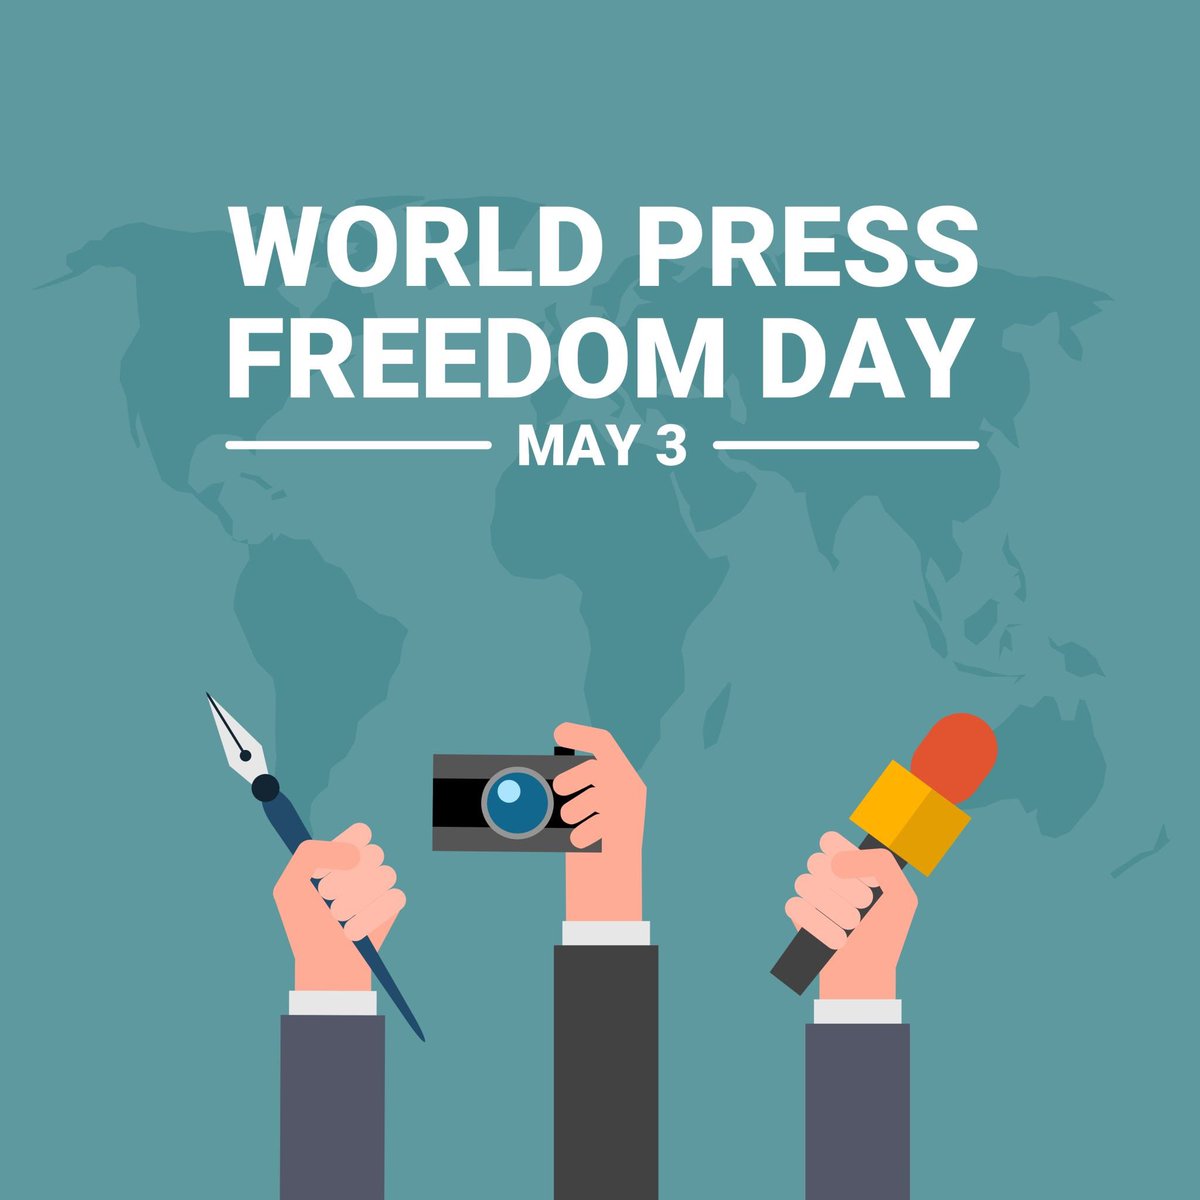 On this #WorldPressFreedomDay, think of giving to journalists taking risks to provide us with the verified information we need to understand the world. This year I am giving to @globeandmail @LOrientLeJour and the @guardian. Support journalists + media workers!